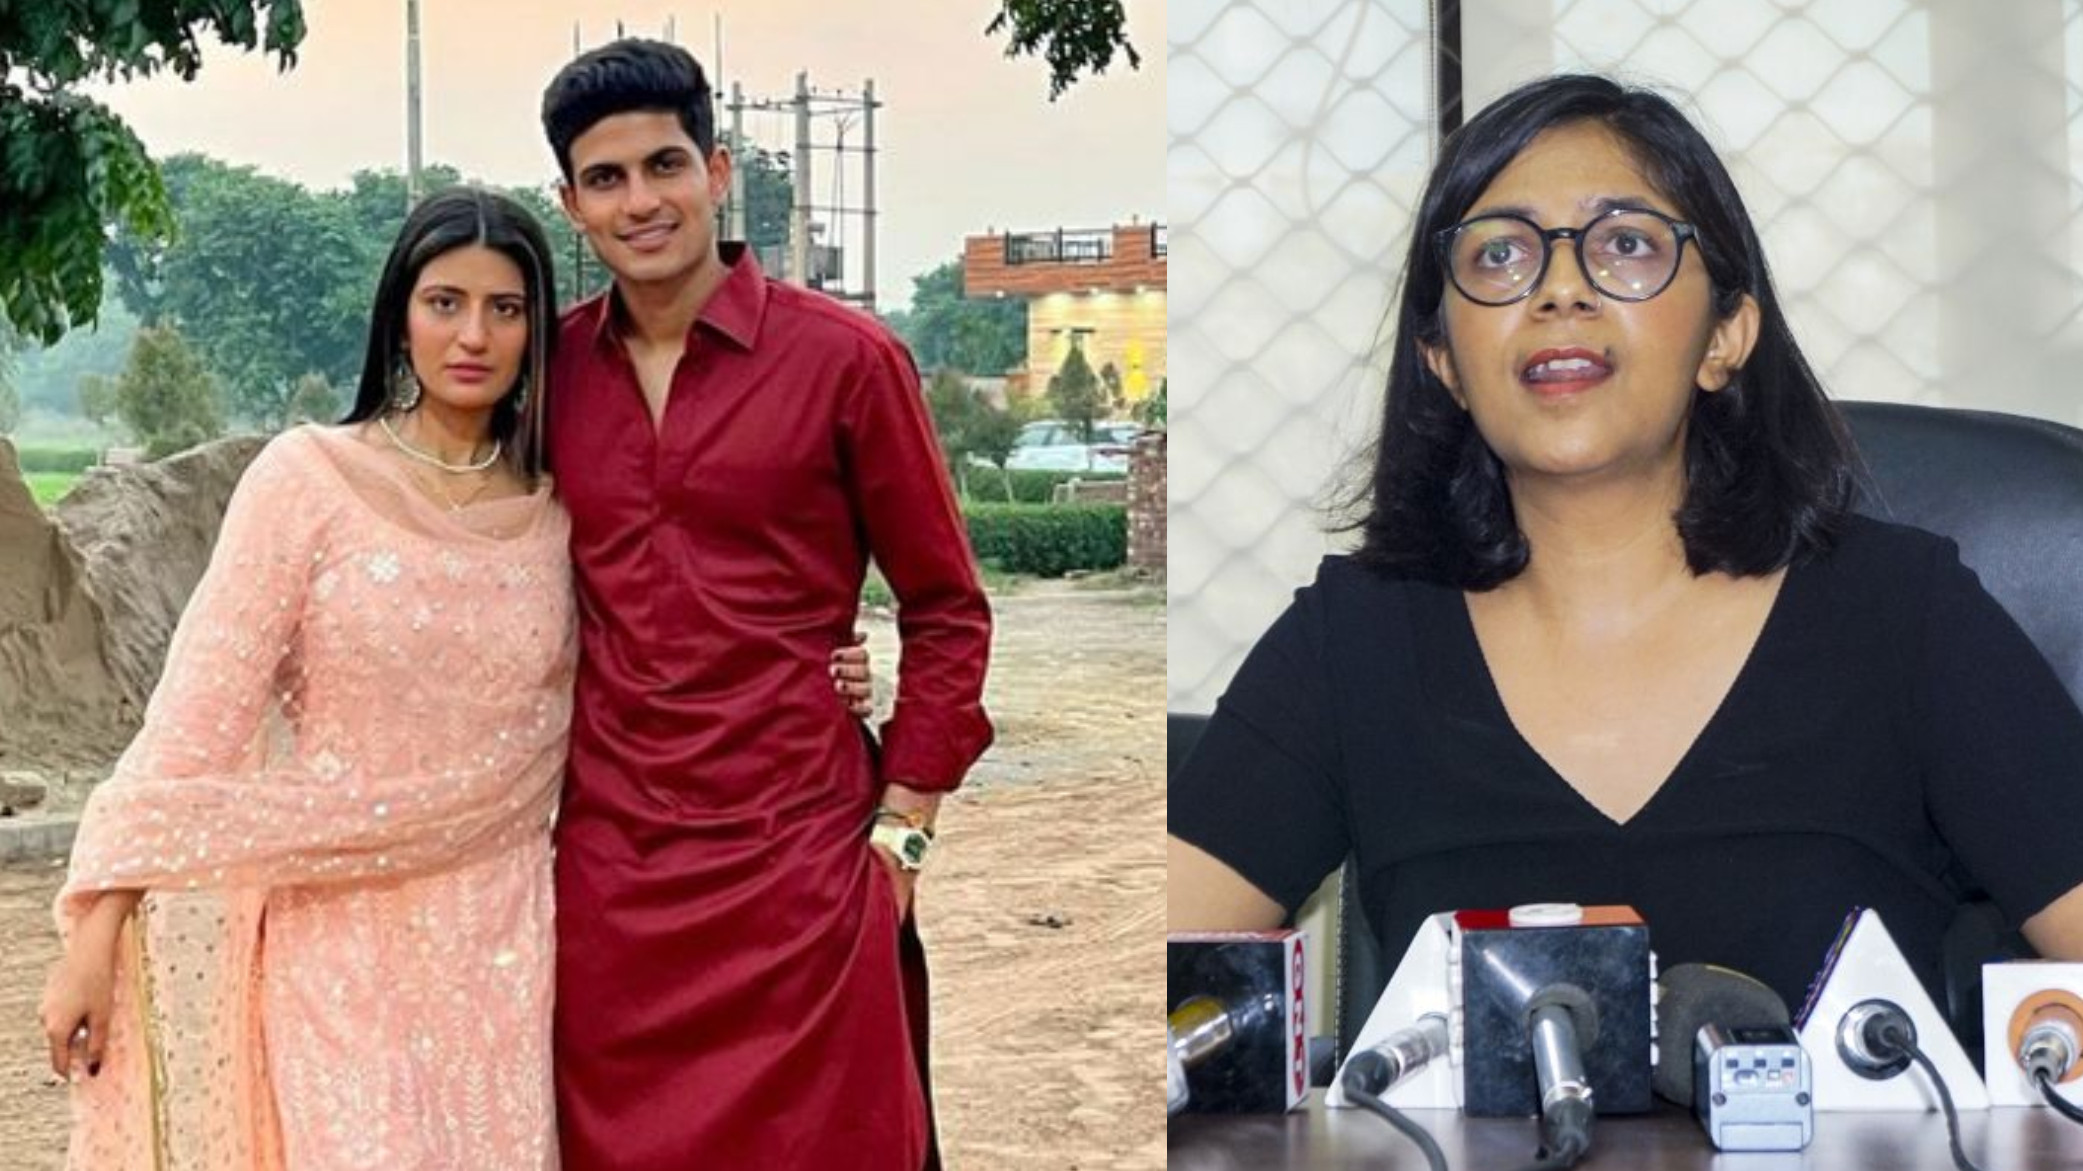 IPL 2023: DCW asks Delhi police to file FIR after Shubman Gill’s sister Shahneel faced online abuse post RCB v GT tie